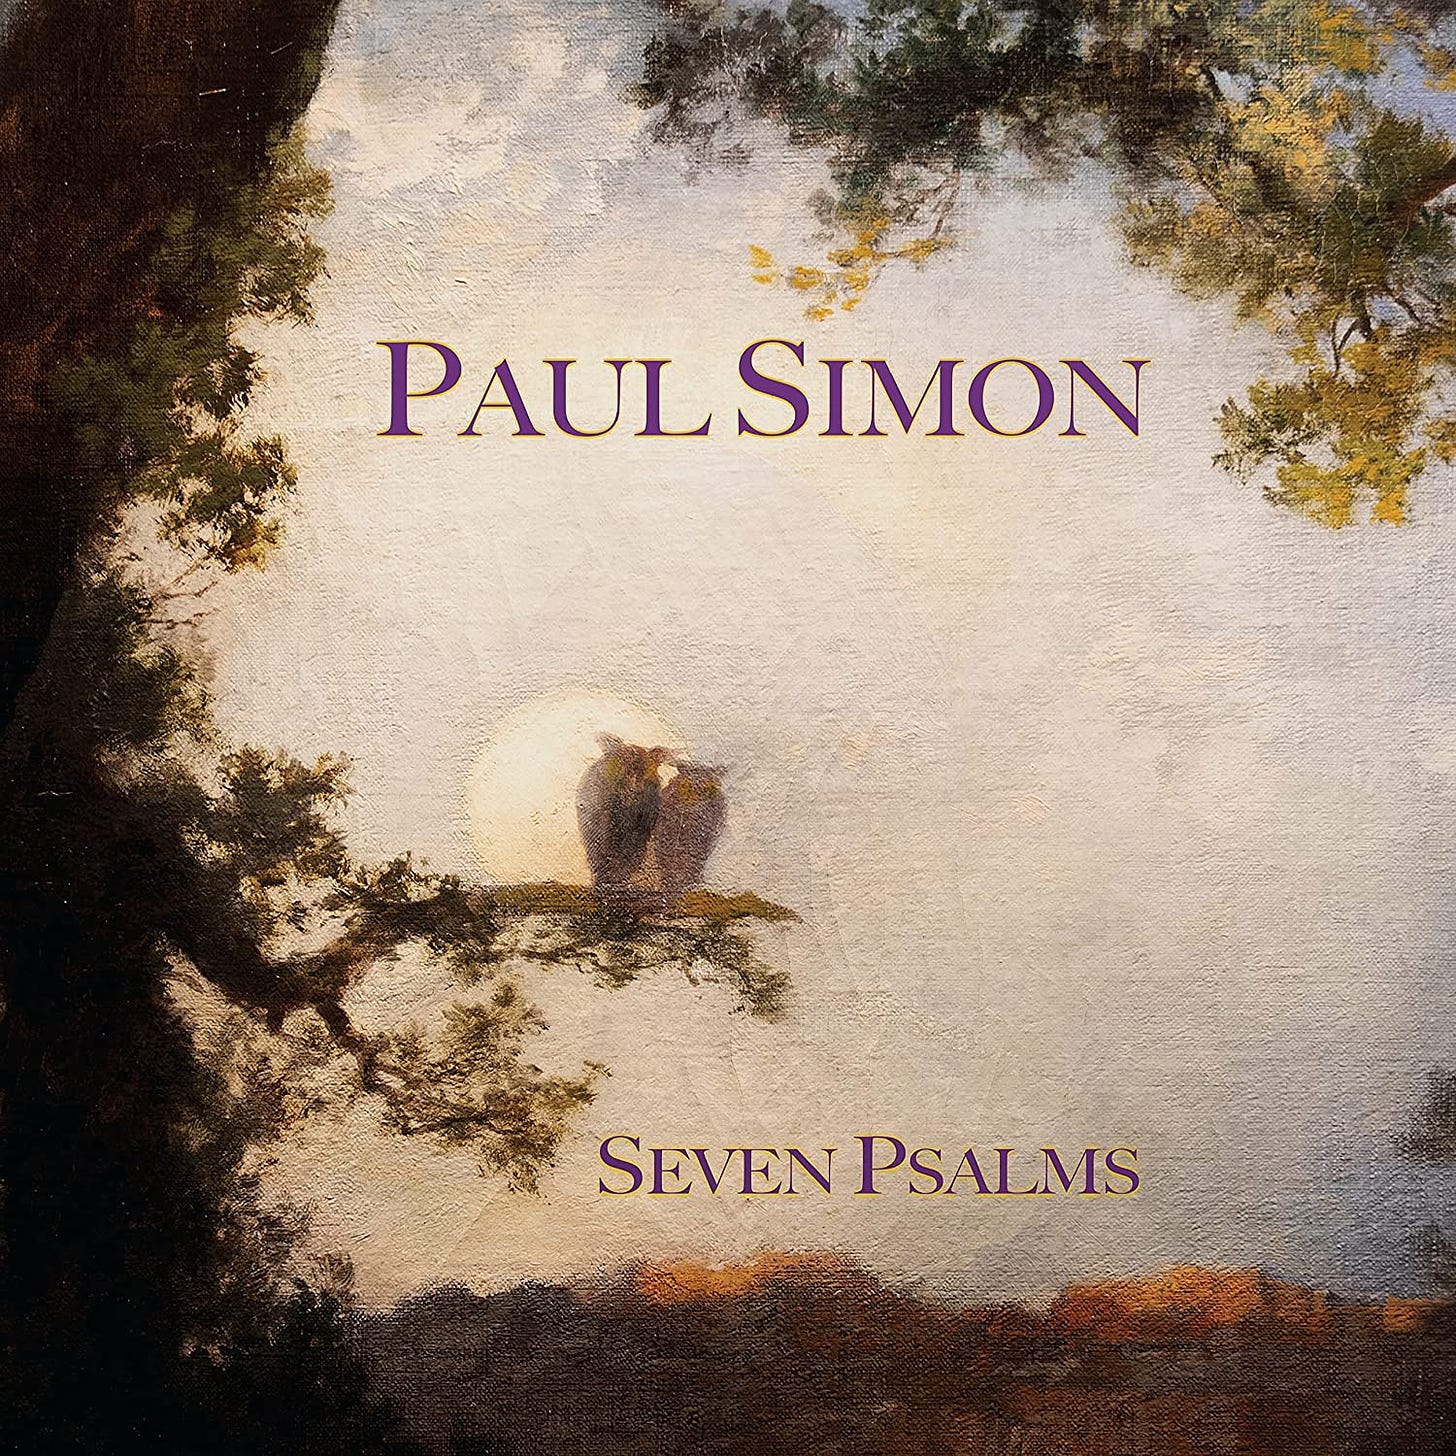 Seven Psalms by Paul Simon Reviews and Tracks - Metacritic